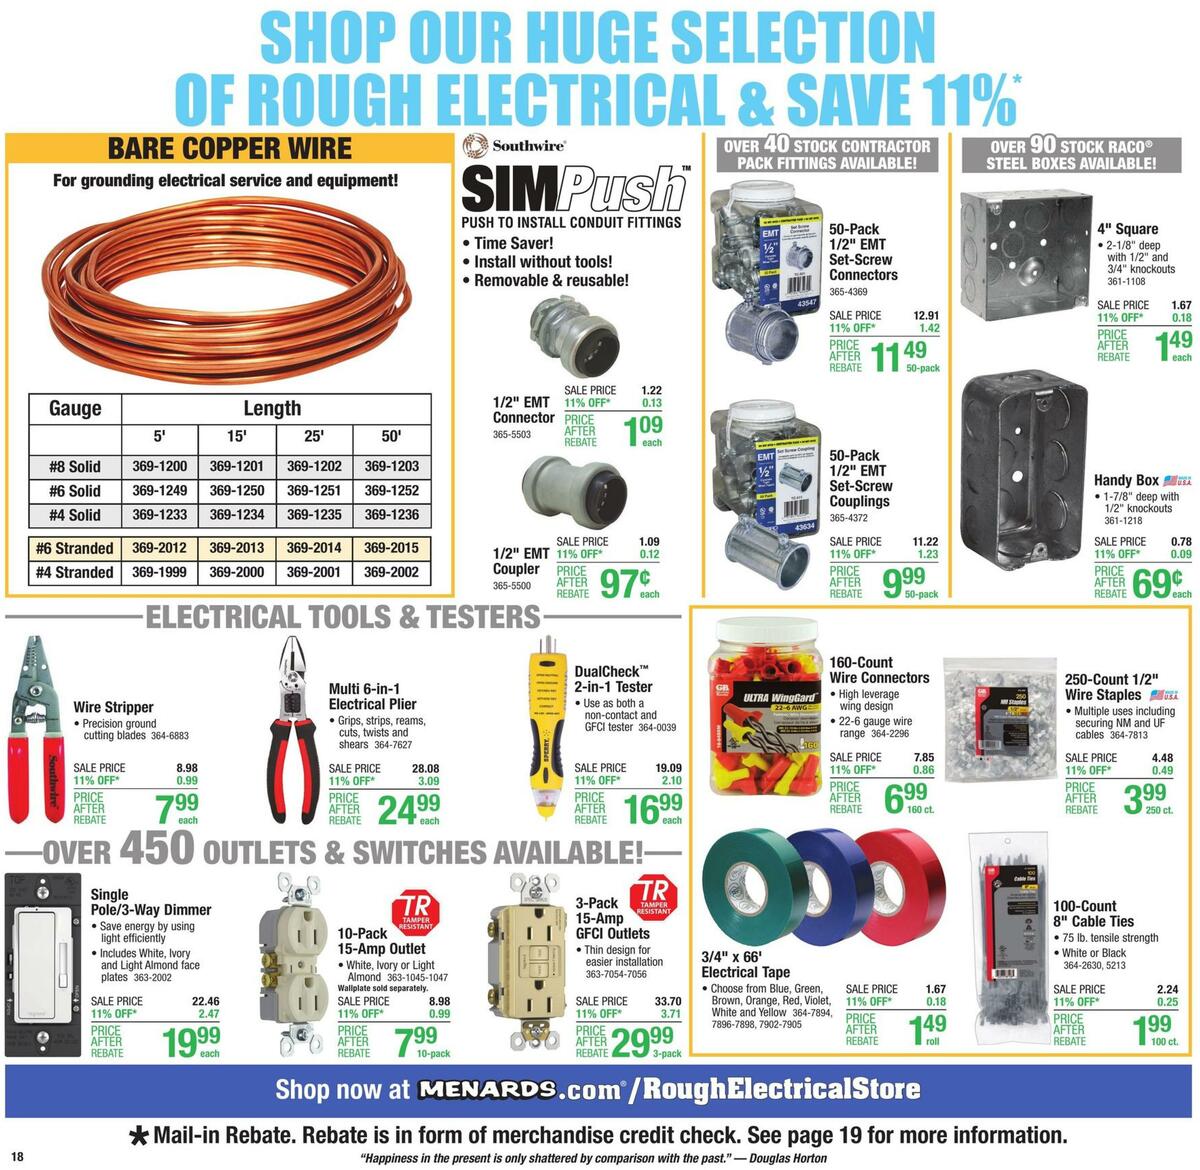 Menards Weekly Ad from March 14